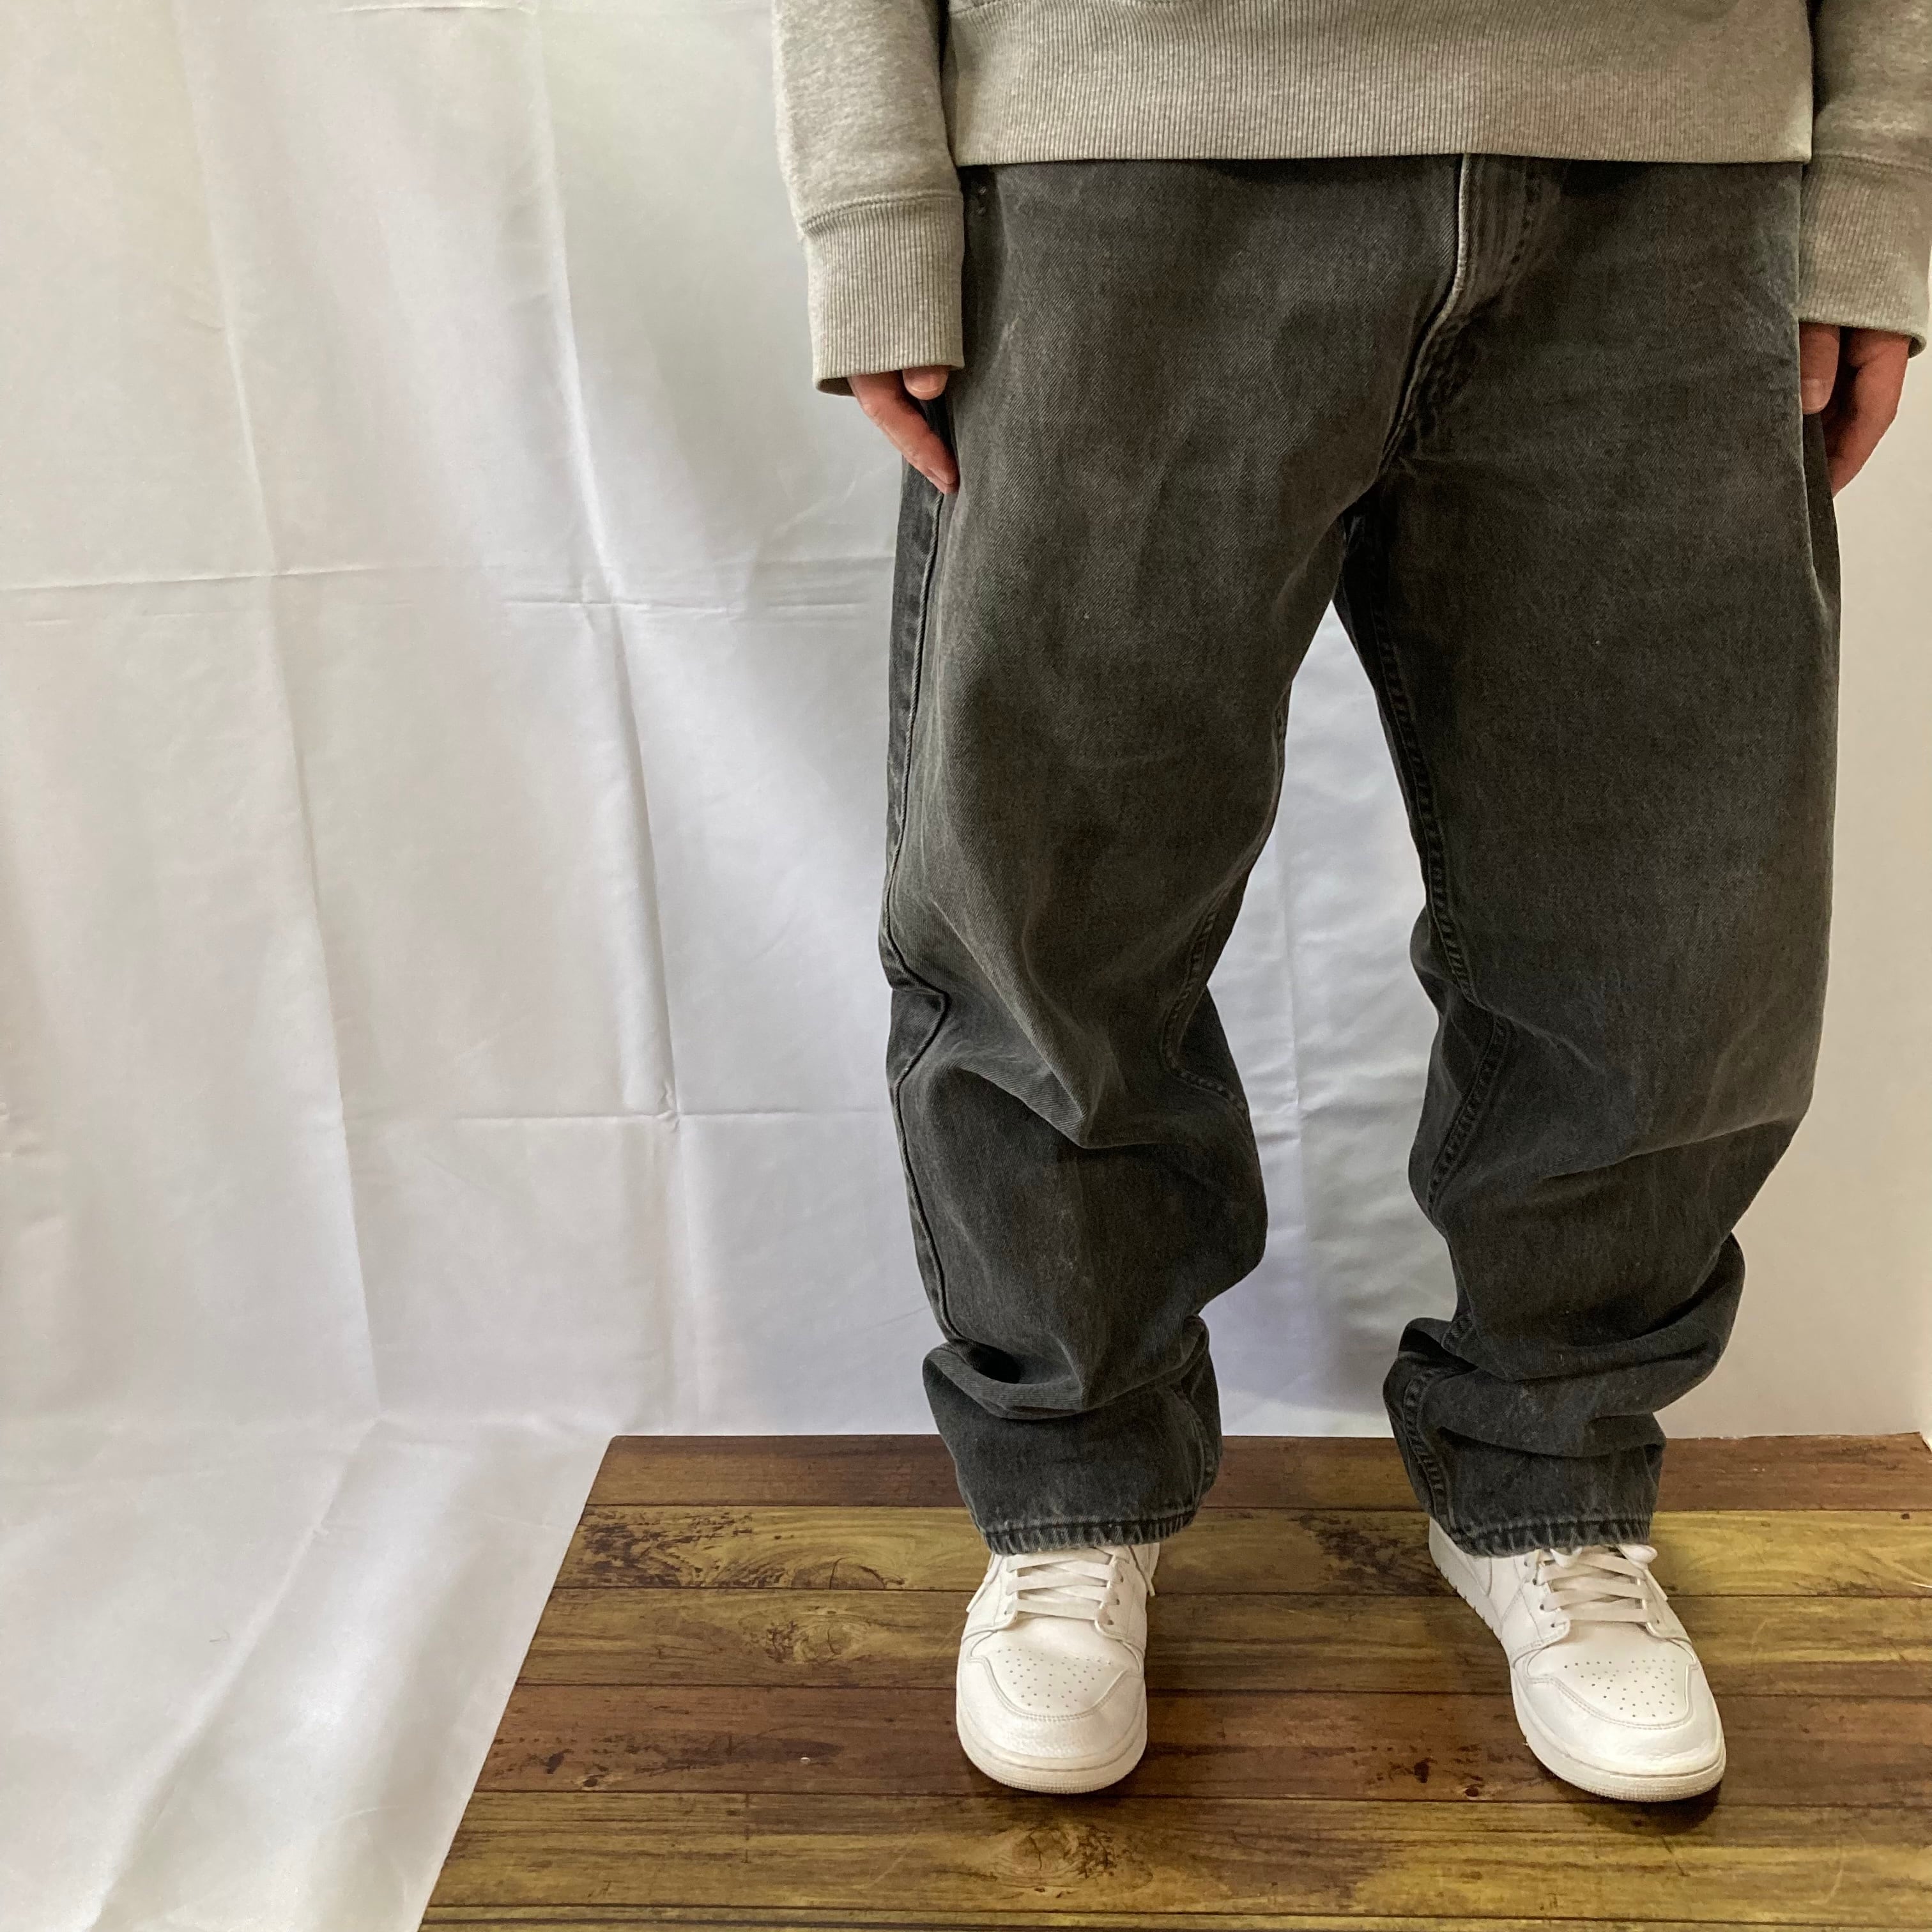 【Levi's 565】W38×L32 Made in USA Denim Jeans リーバイス 565 ...